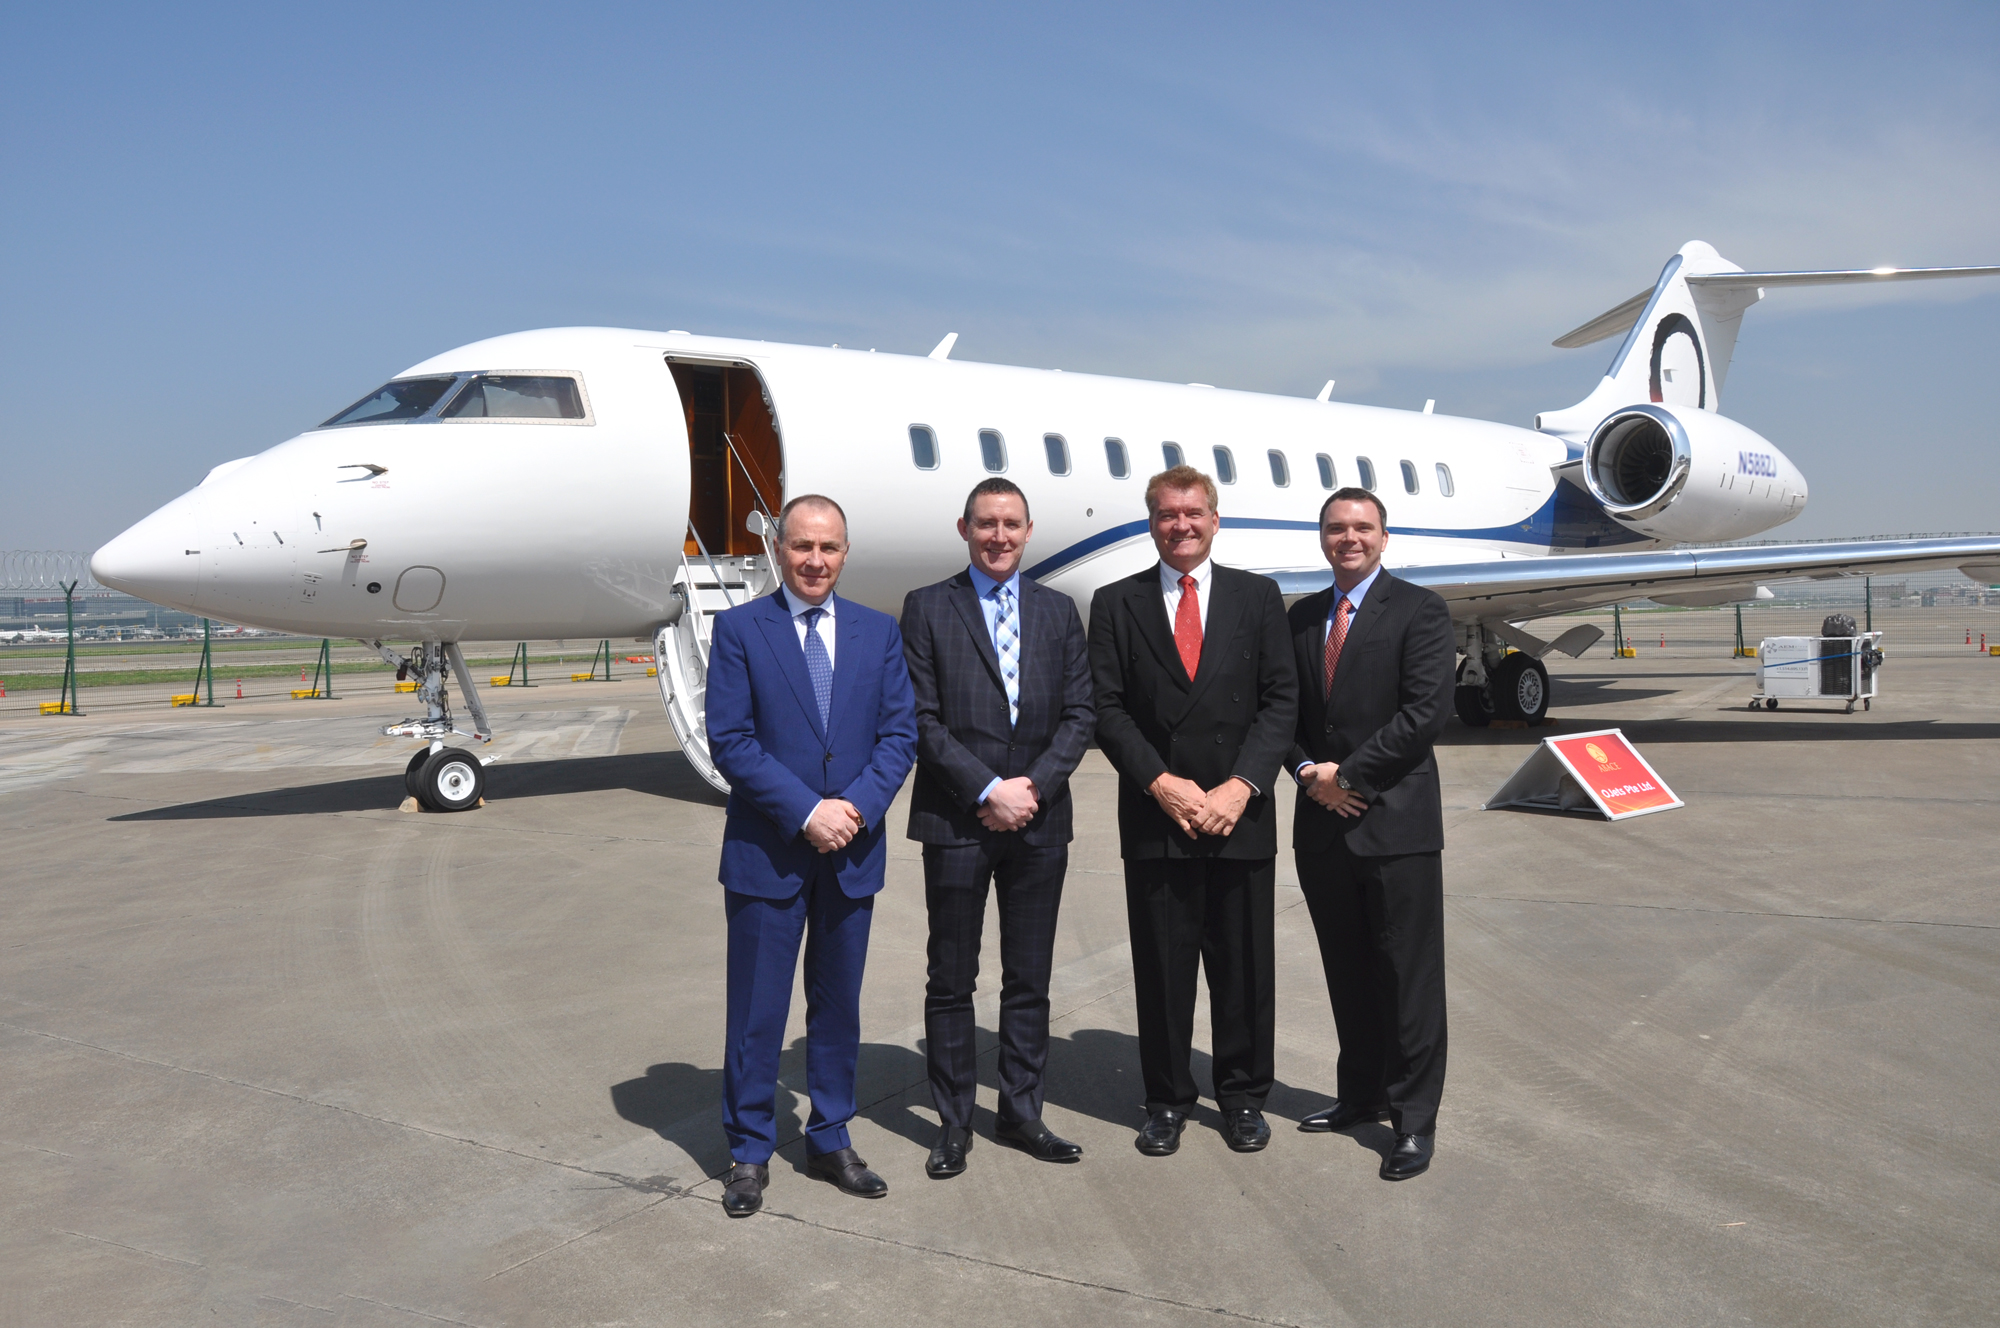 ABACE 2019 (April 15) - Left to Right: Michel Coulomb, Co-Owner and CEO, Elit’Avia; Nick Houseman, Co-Owner and Board Member, Elit’Avia; Phil Mulacek, Chairman, OJets and Marc Vinson, Treasurer, OJets